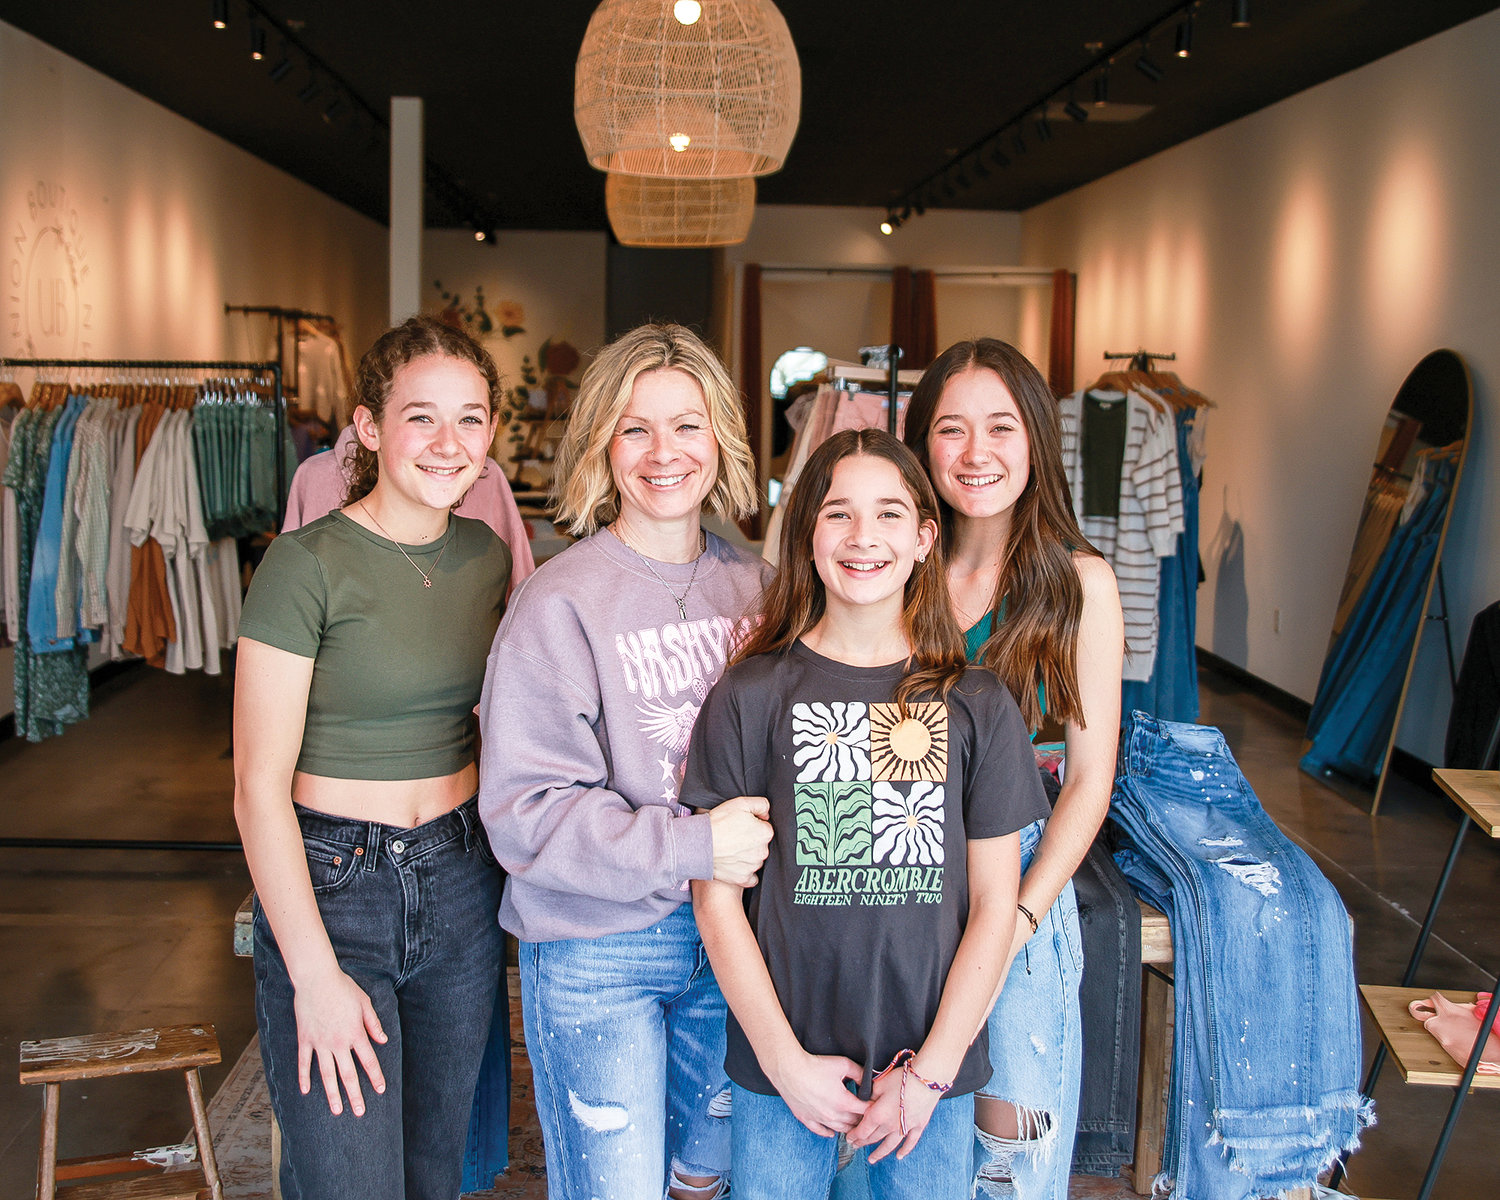 Union Boutique NW is owned by Noelle Cresap and operated by herself and her daughters. From Left to Right, Camille Cresap, Noelle Cresap, Kylie Cresap, and Laura Cresap.